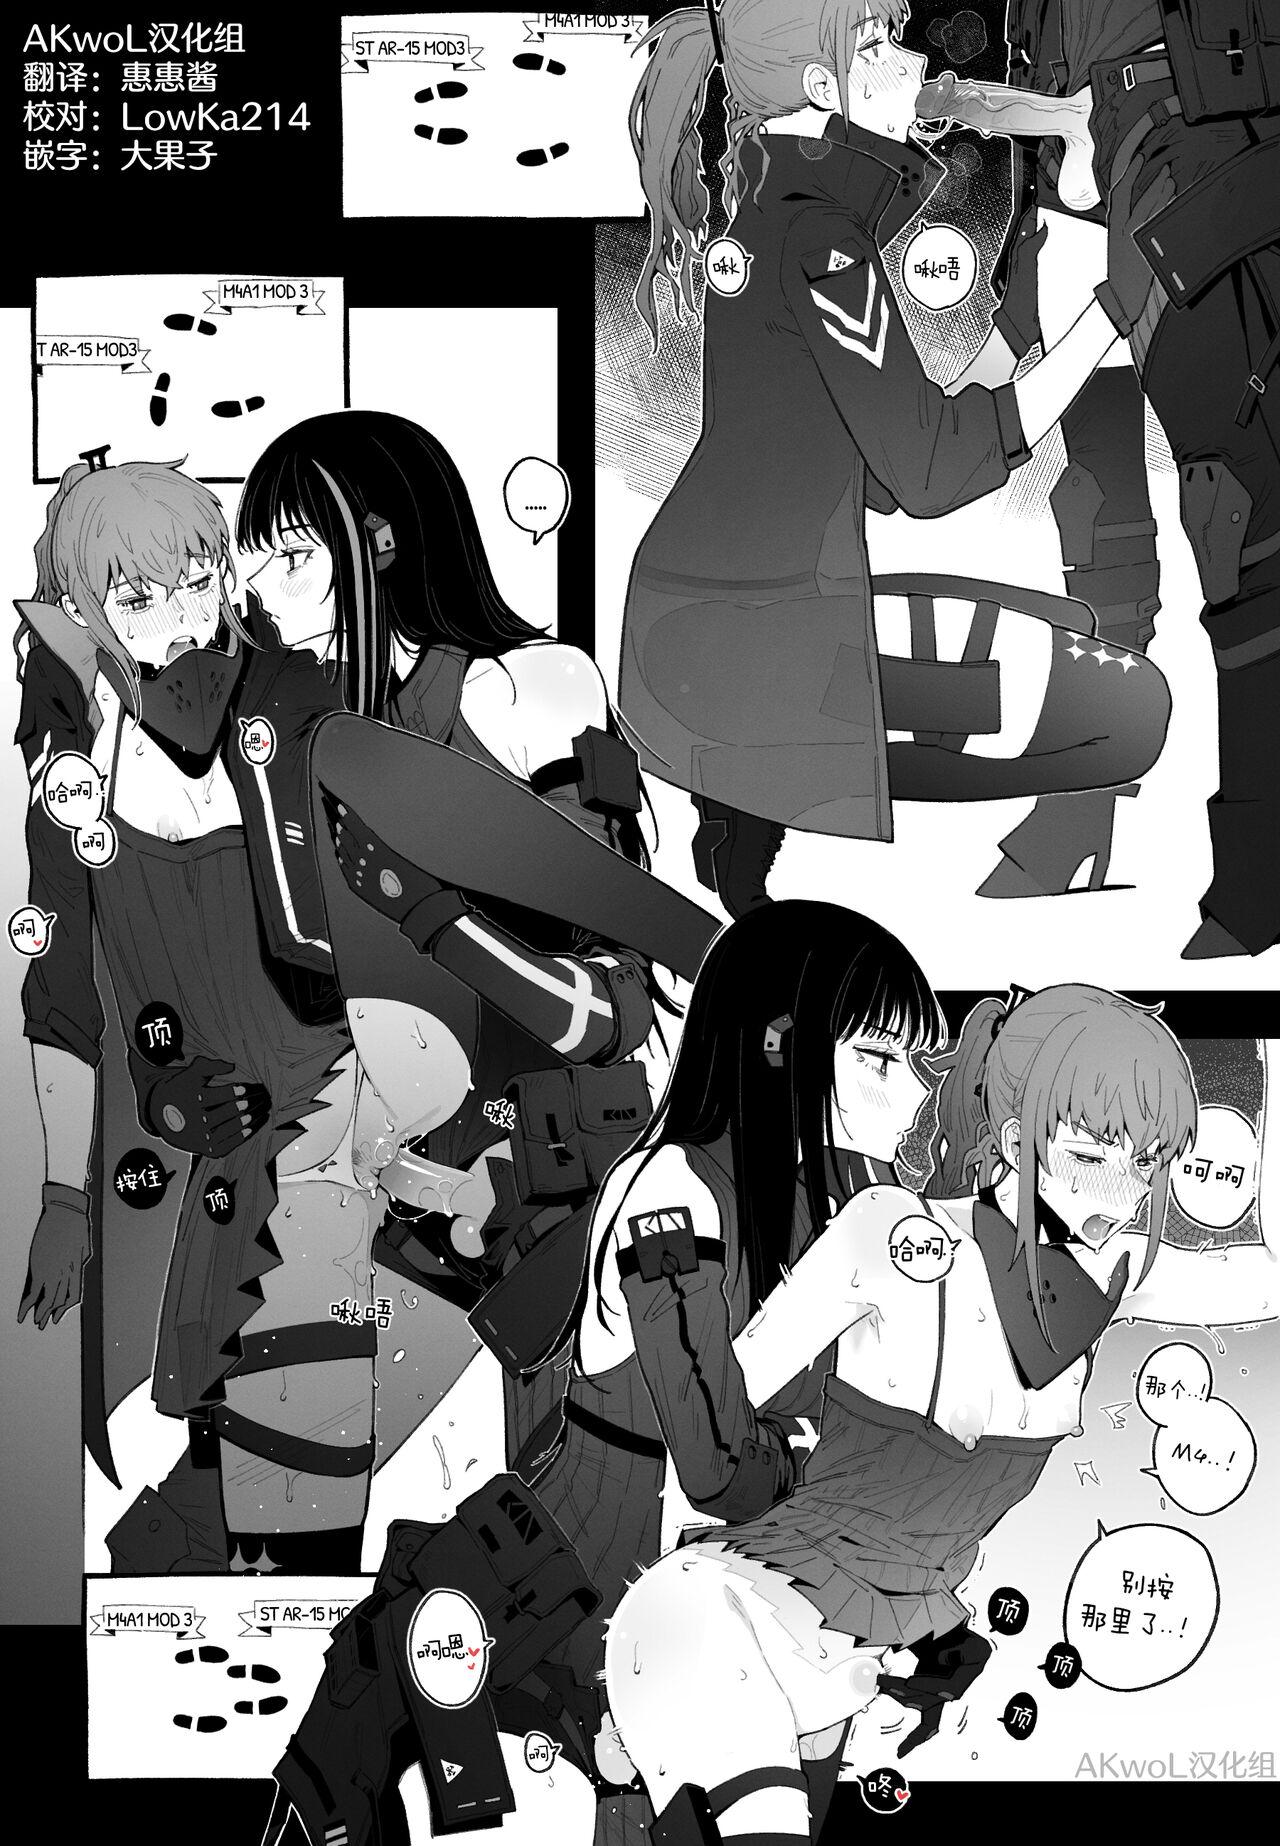 Gay Skinny Marauder's Map - Girls frontline India - Page 2